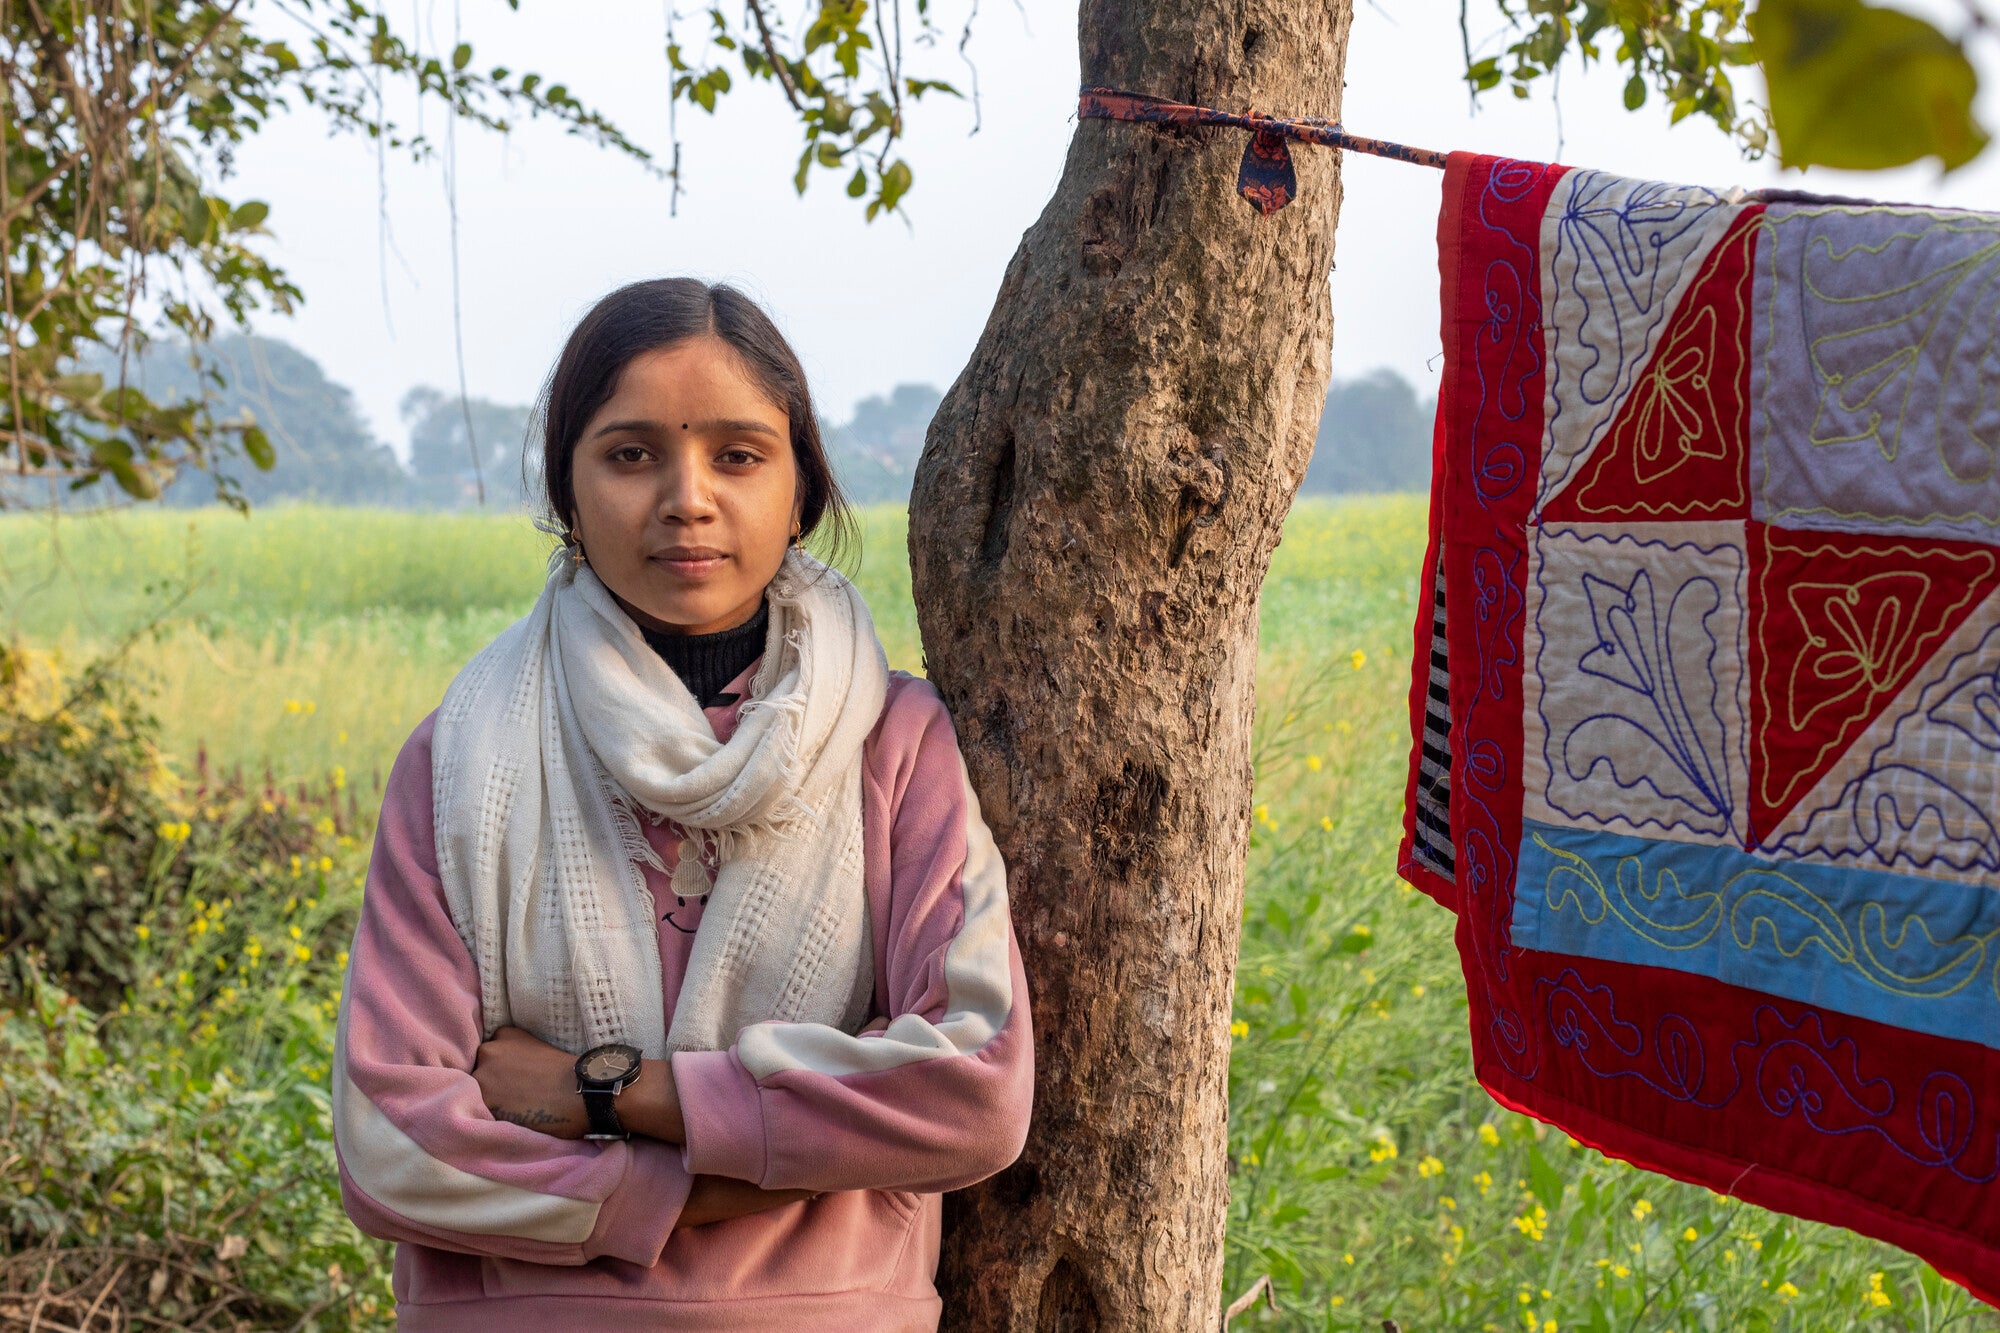 A young Nepali woman wearing a white scarf and pink jacket leans against a tree. A red and white quilt is hanging on a clothesline from the tree.